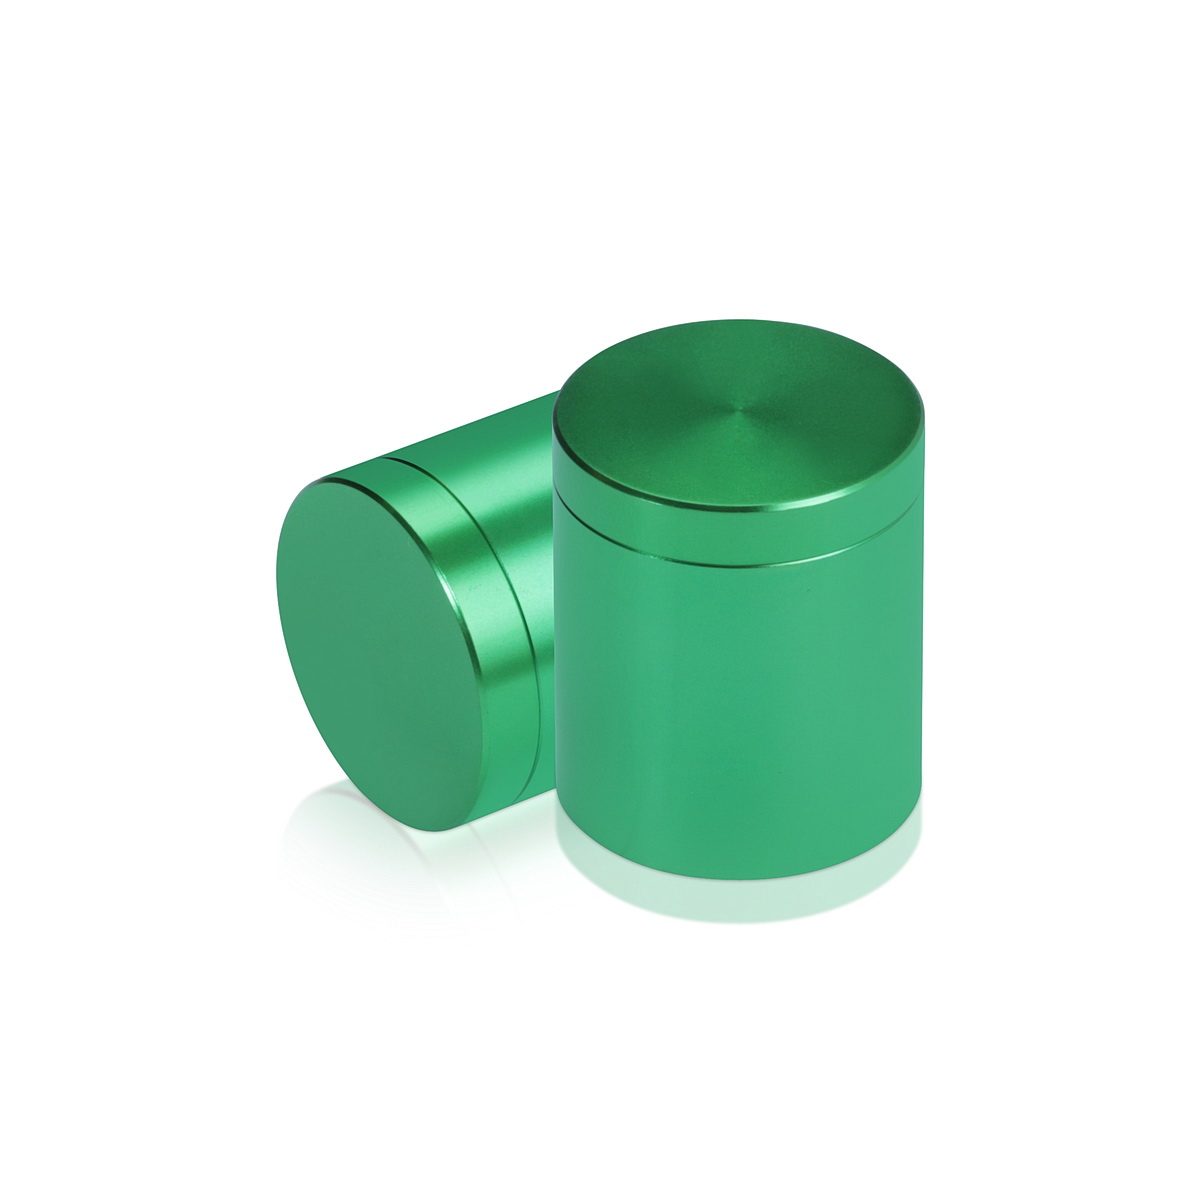 1'' Diameter X 1'' Barrel Length, Affordable Aluminum Standoffs, Green Anodized Finish Easy Fasten Standoff (For Inside / Outside use) [Required Material Hole Size: 7/16'']